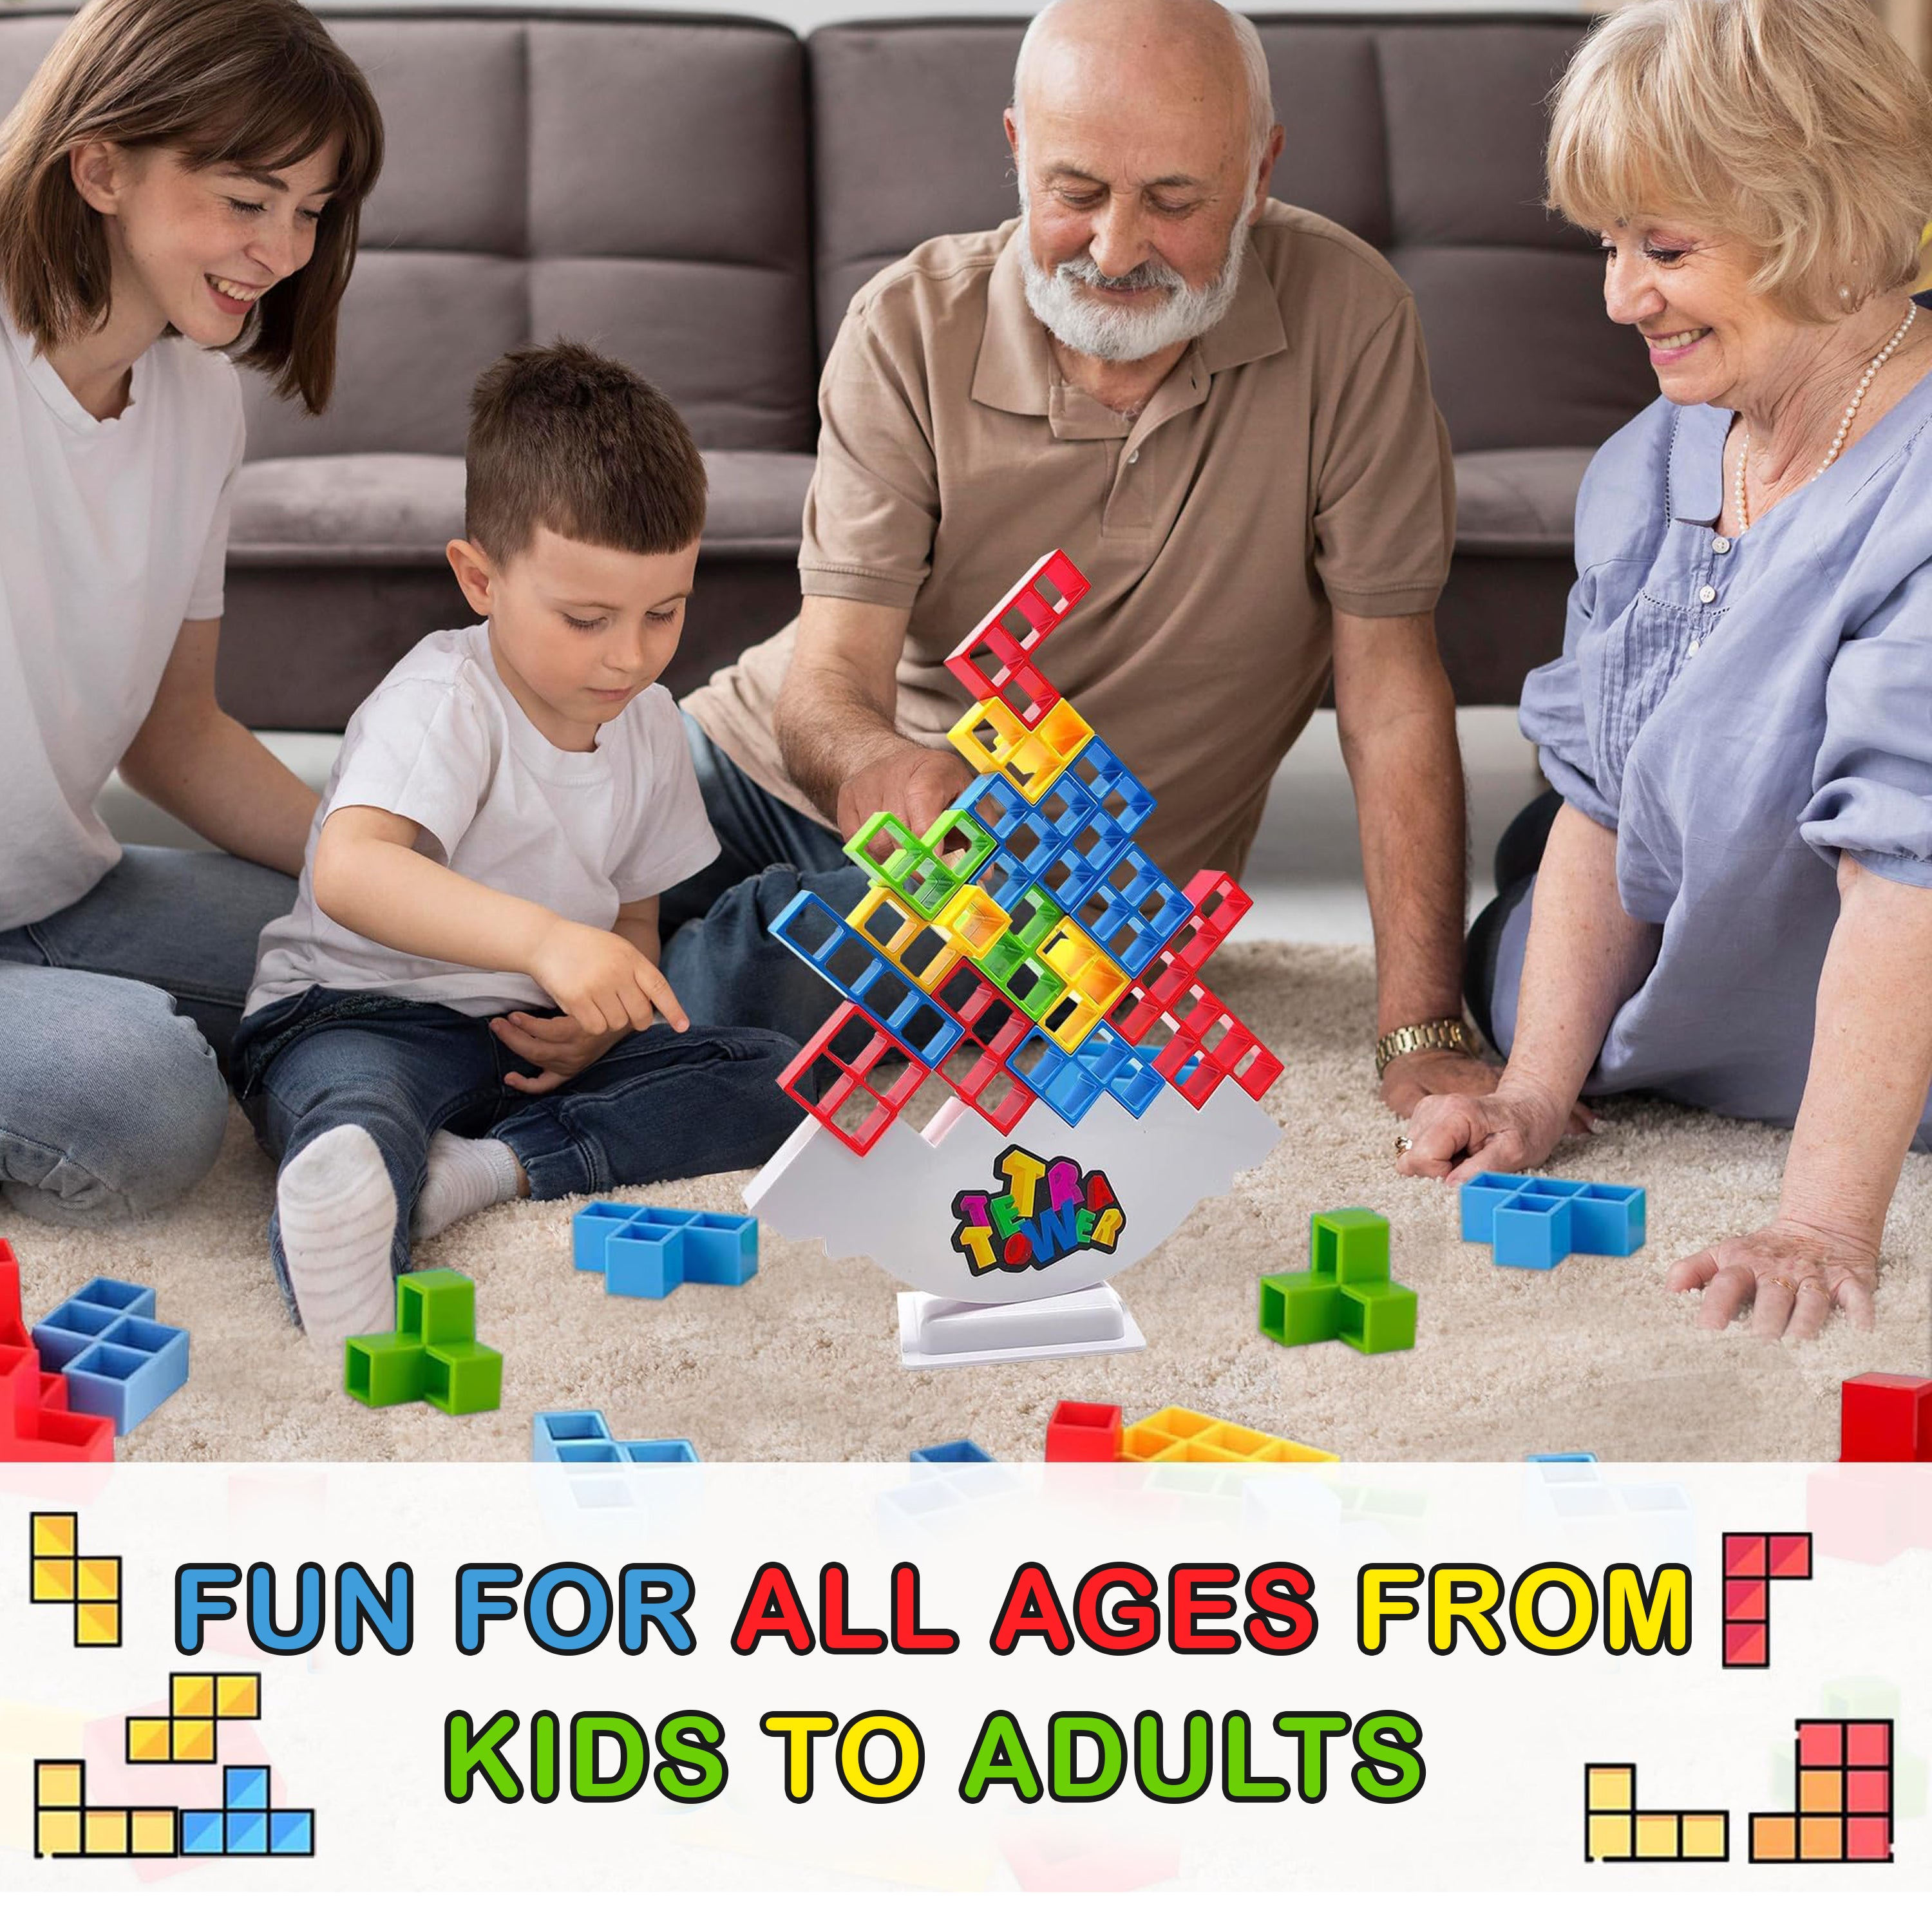 Tygatec 32 Pcs Tetra Tower Stacking Blocks Balance Game, Family Board Games for Kids & Adults-Balancing Stacking Toys Building Blocks for Parties, Travel 【Multi-Colored】